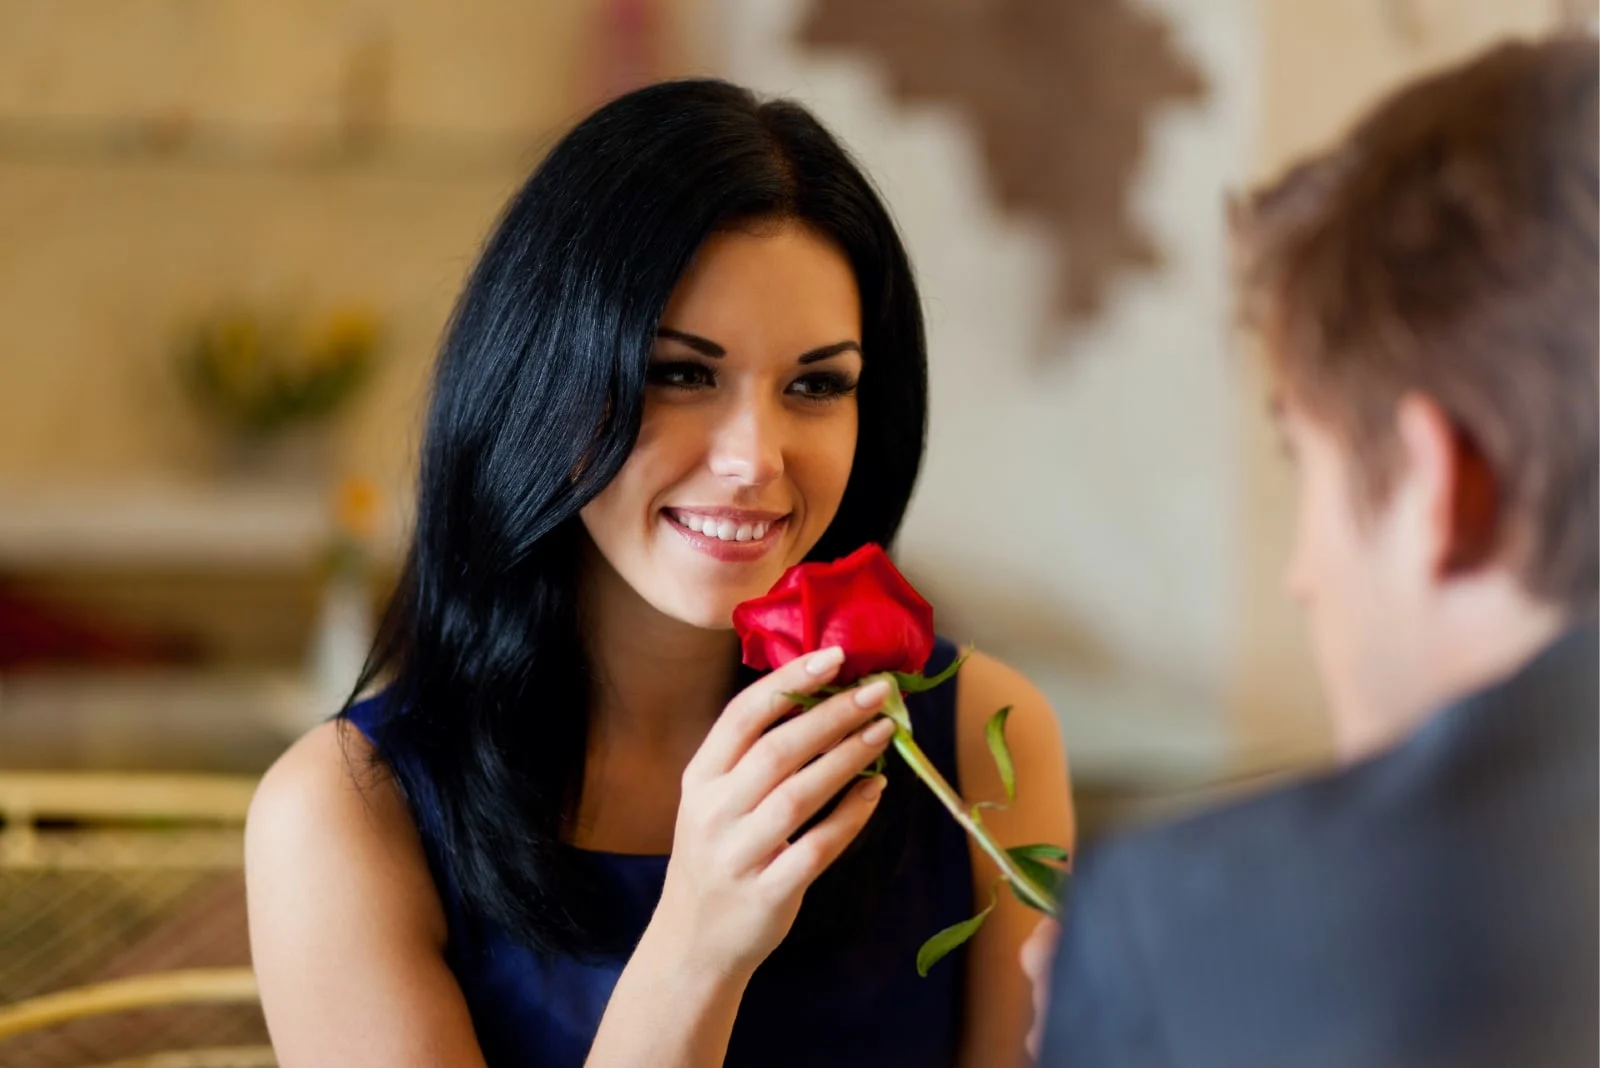 man giving red rose to woman while sitting at table